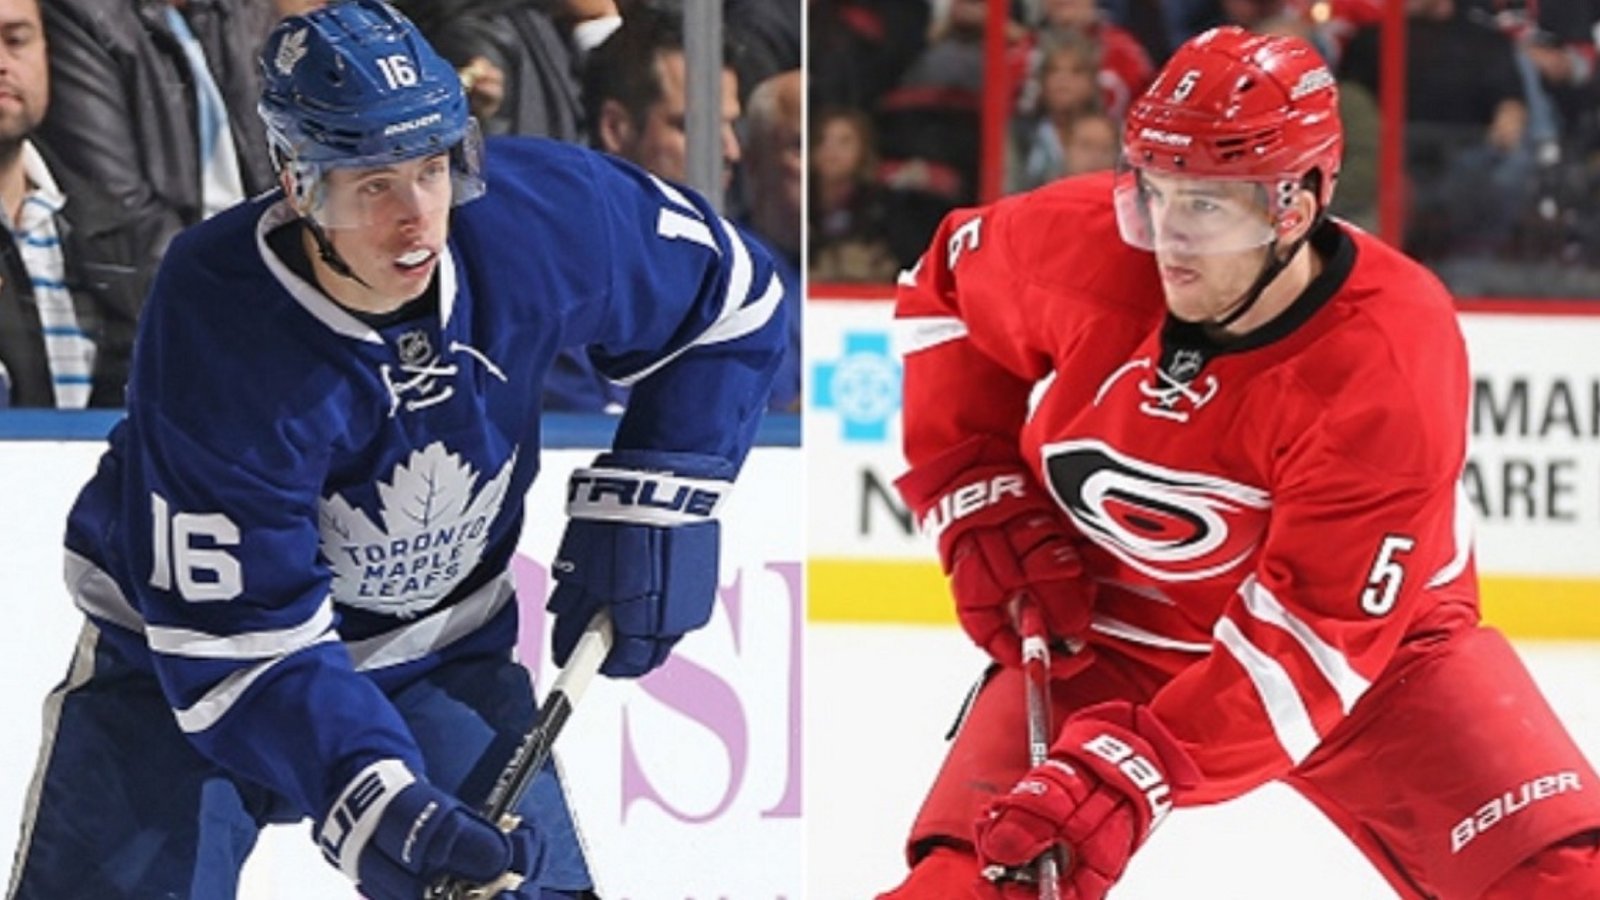 Rumor of a massive player for player trade between the Leafs and Hurricanes.